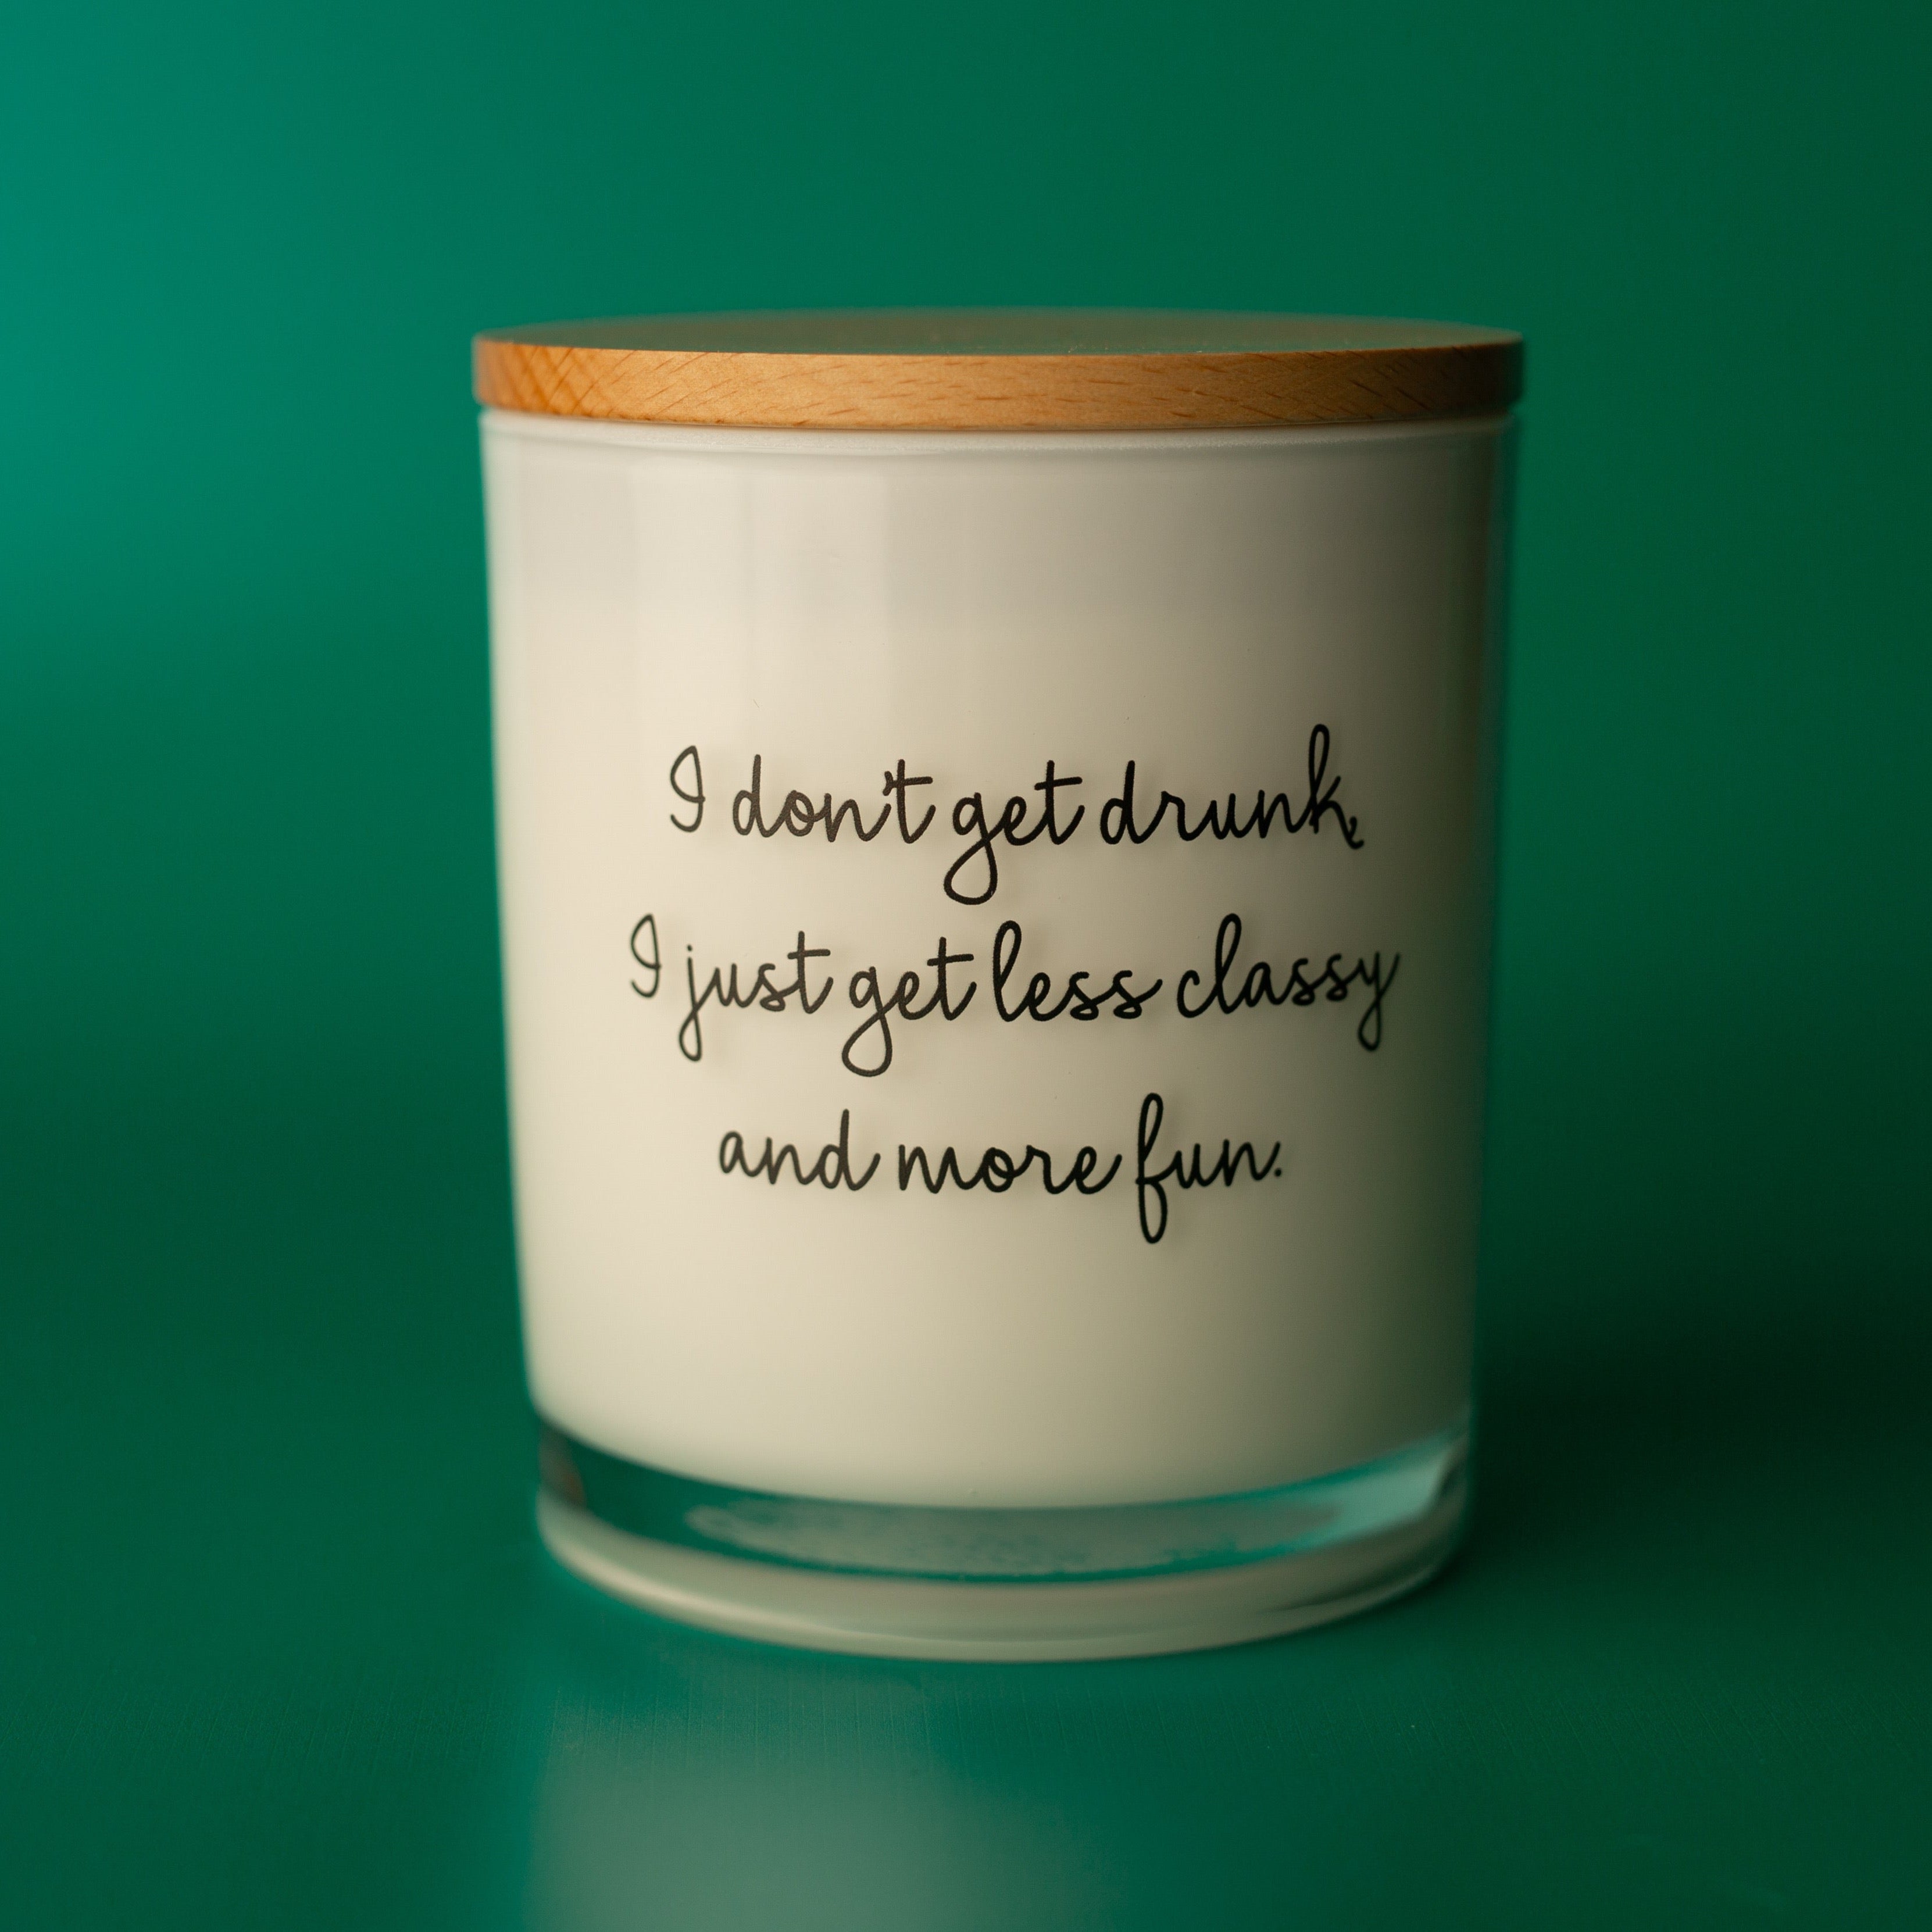 LESS%20CLASSY%20PRINTED%20CANDLE